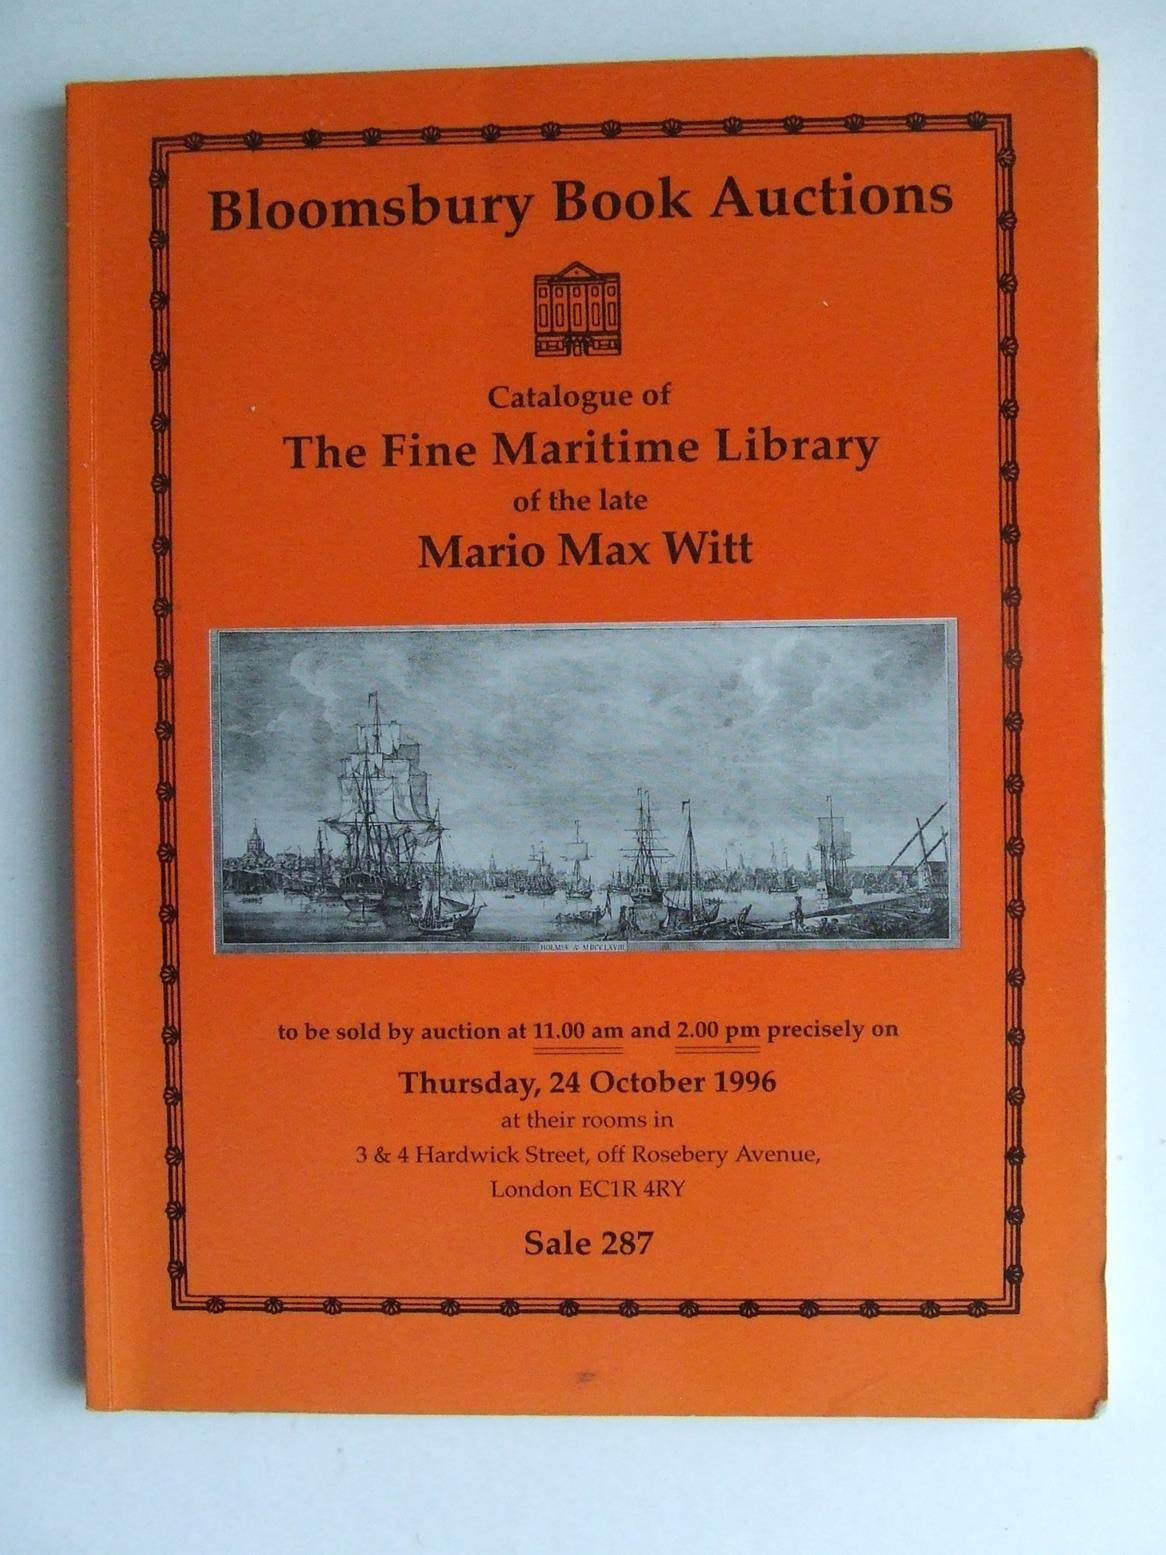 Catalogue of the Fine Maritime Library of the late Mario Max Witt